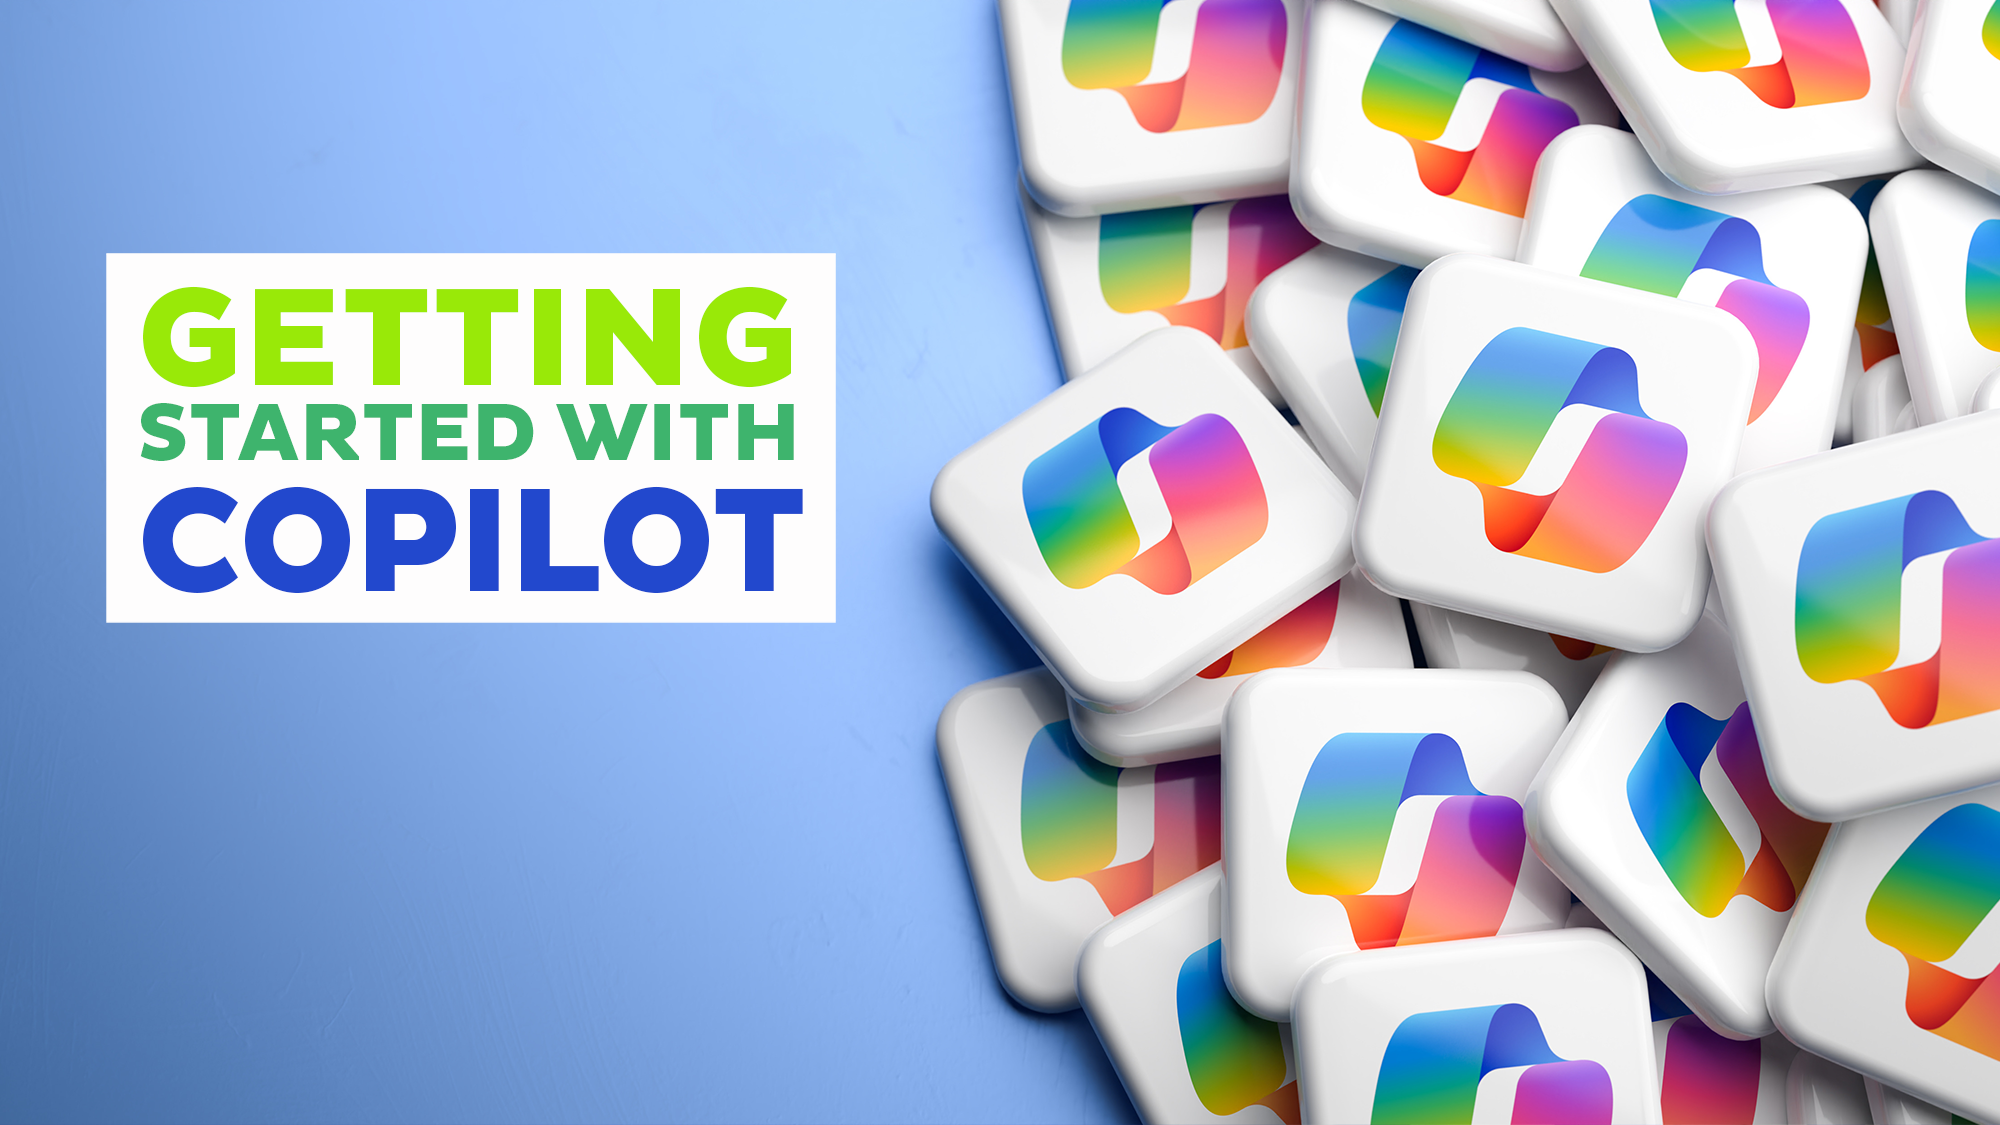 Getting Started with Copilot